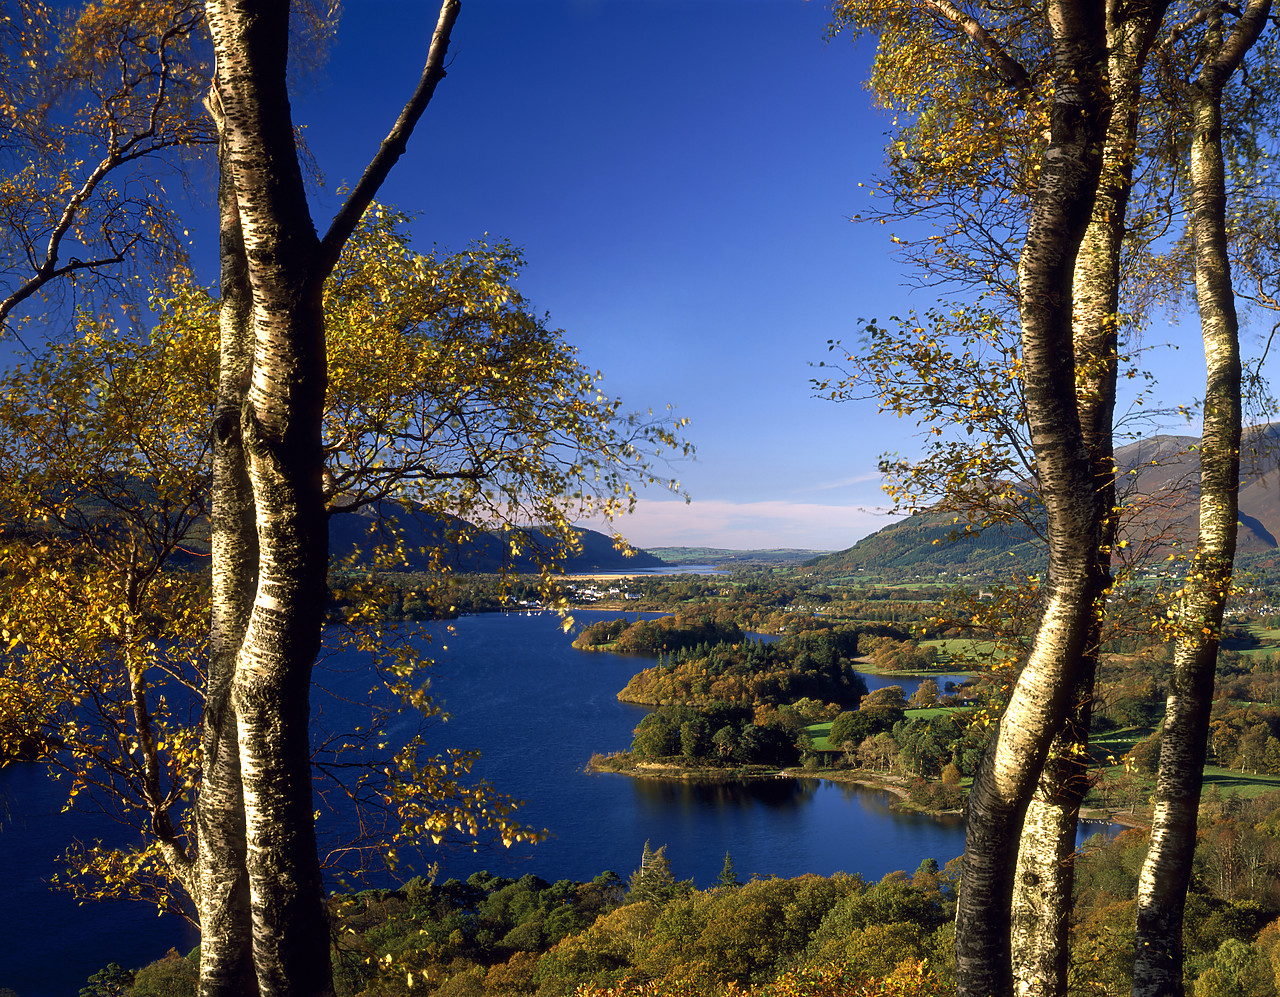 #060769-1 - View over Derwent Water, Lake District National Park, Cumbria, England